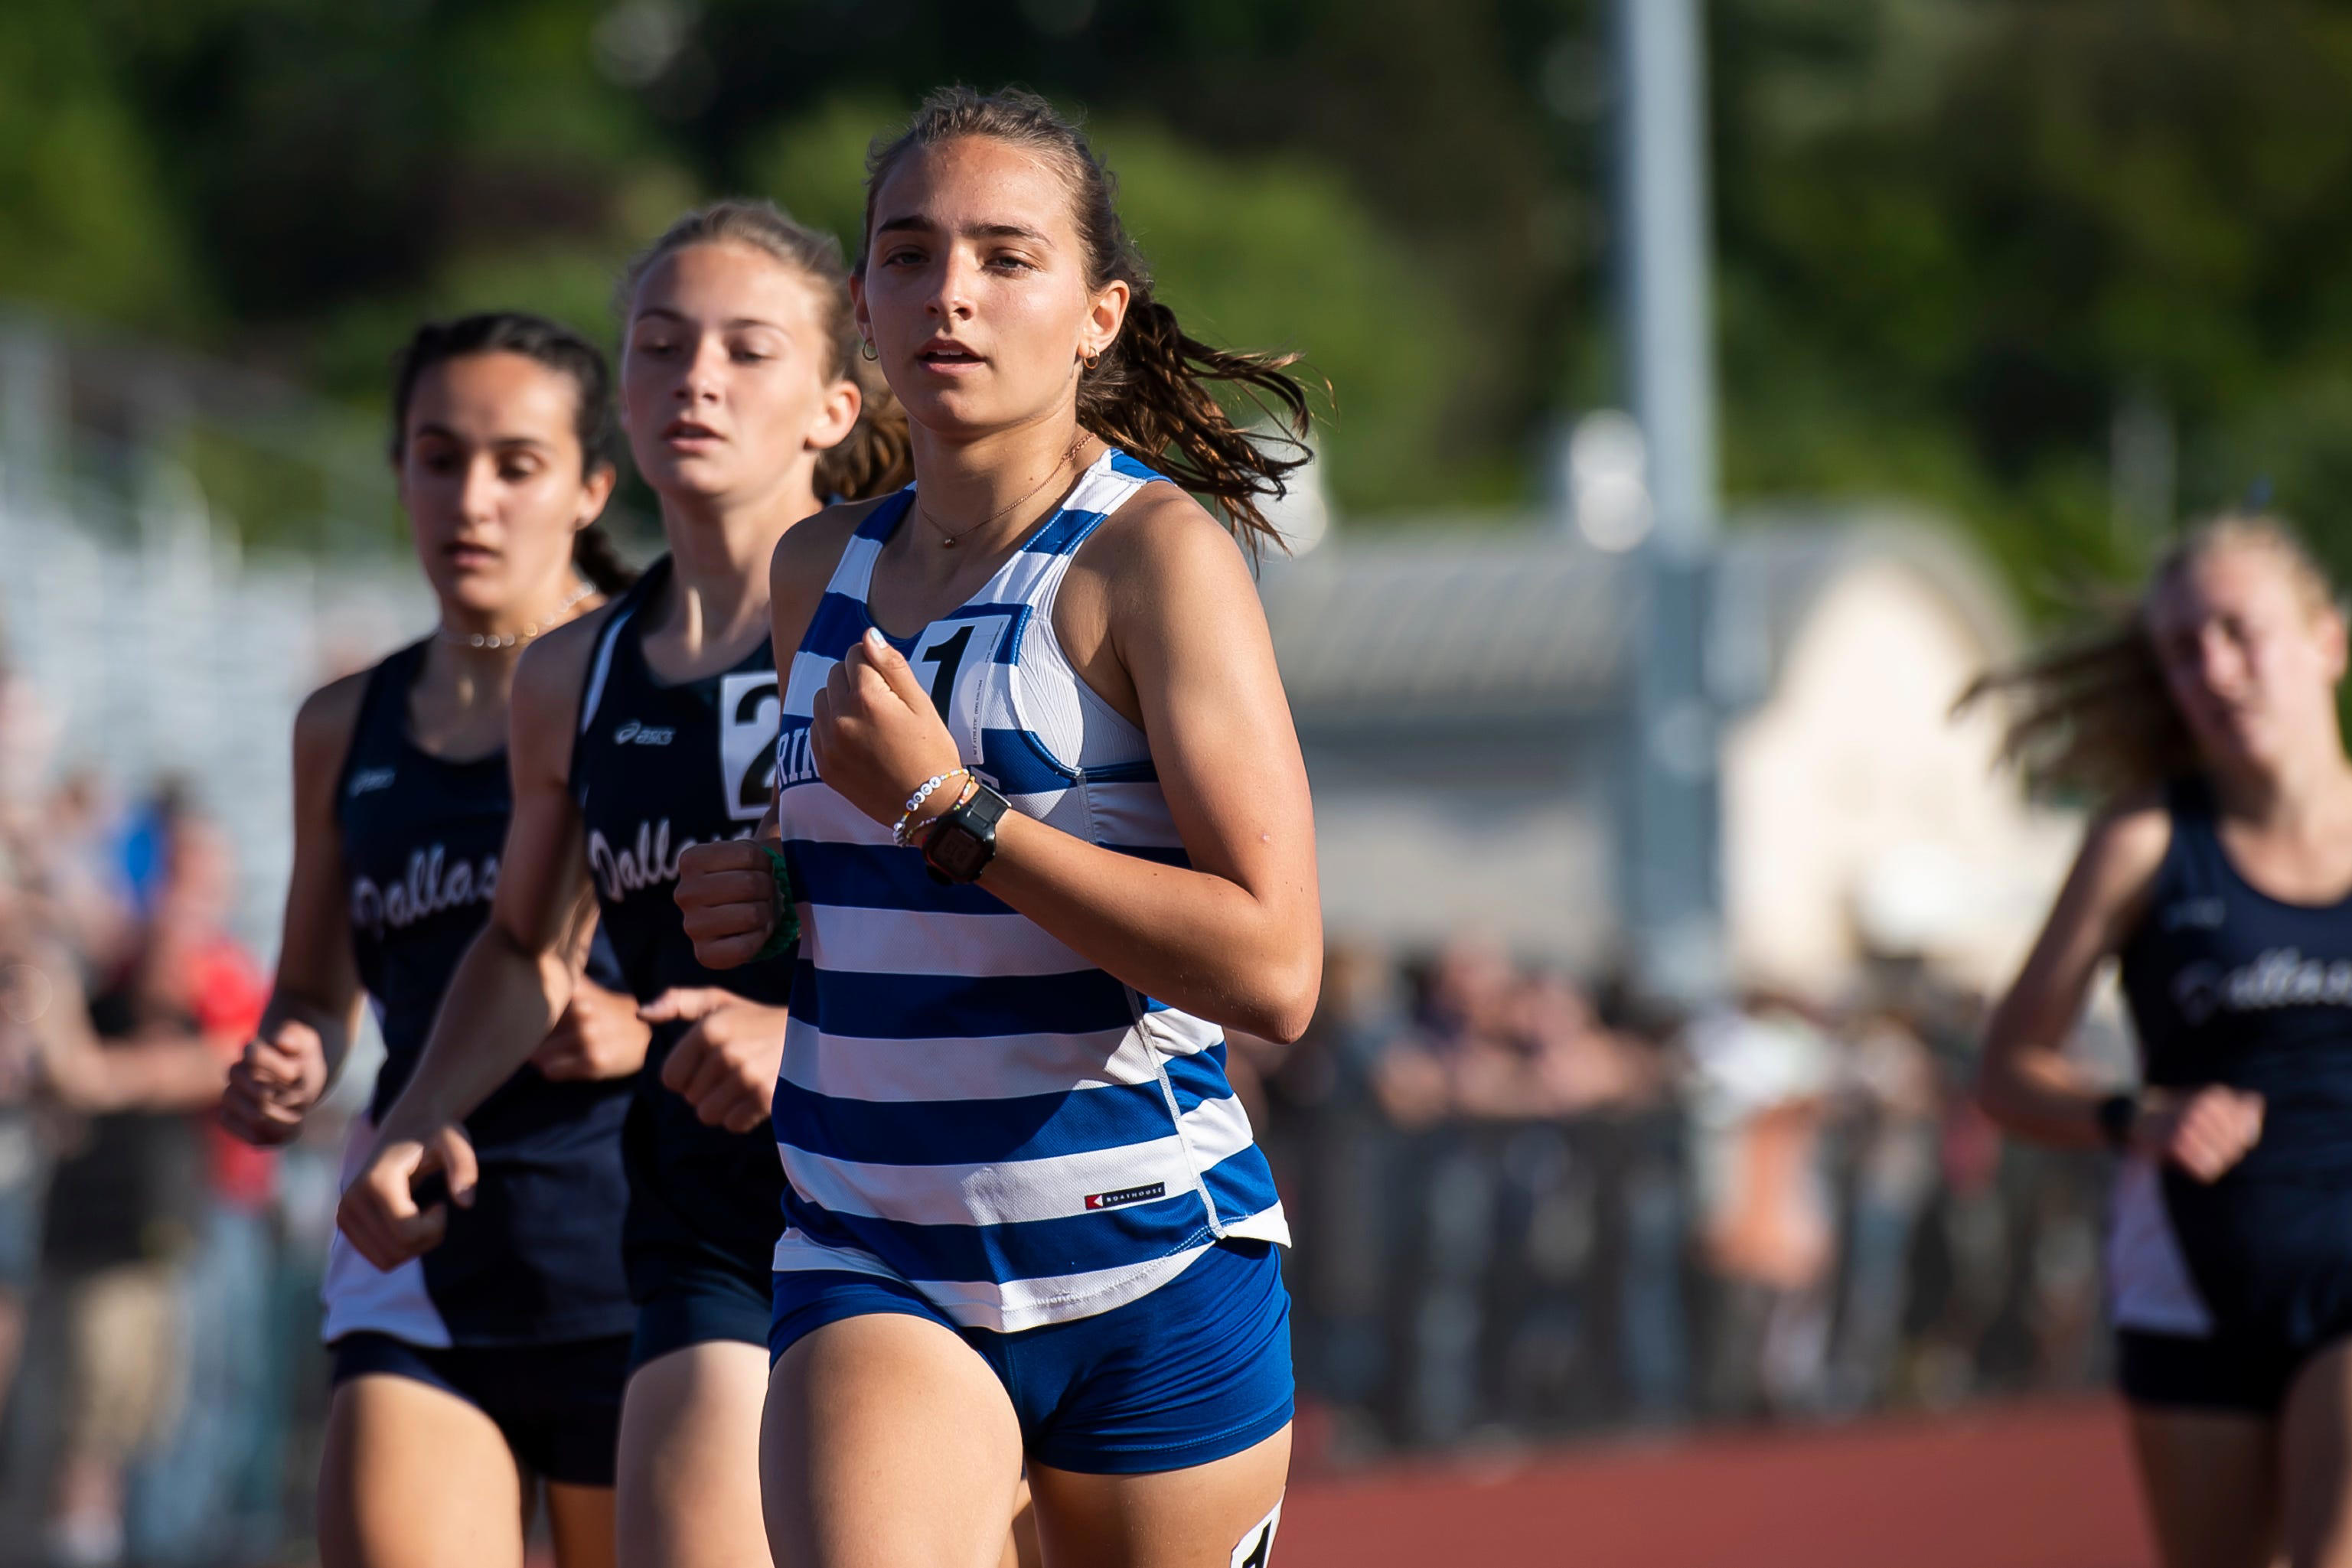 Freshman captures 4 golds at YAIAA track and field championships as 5